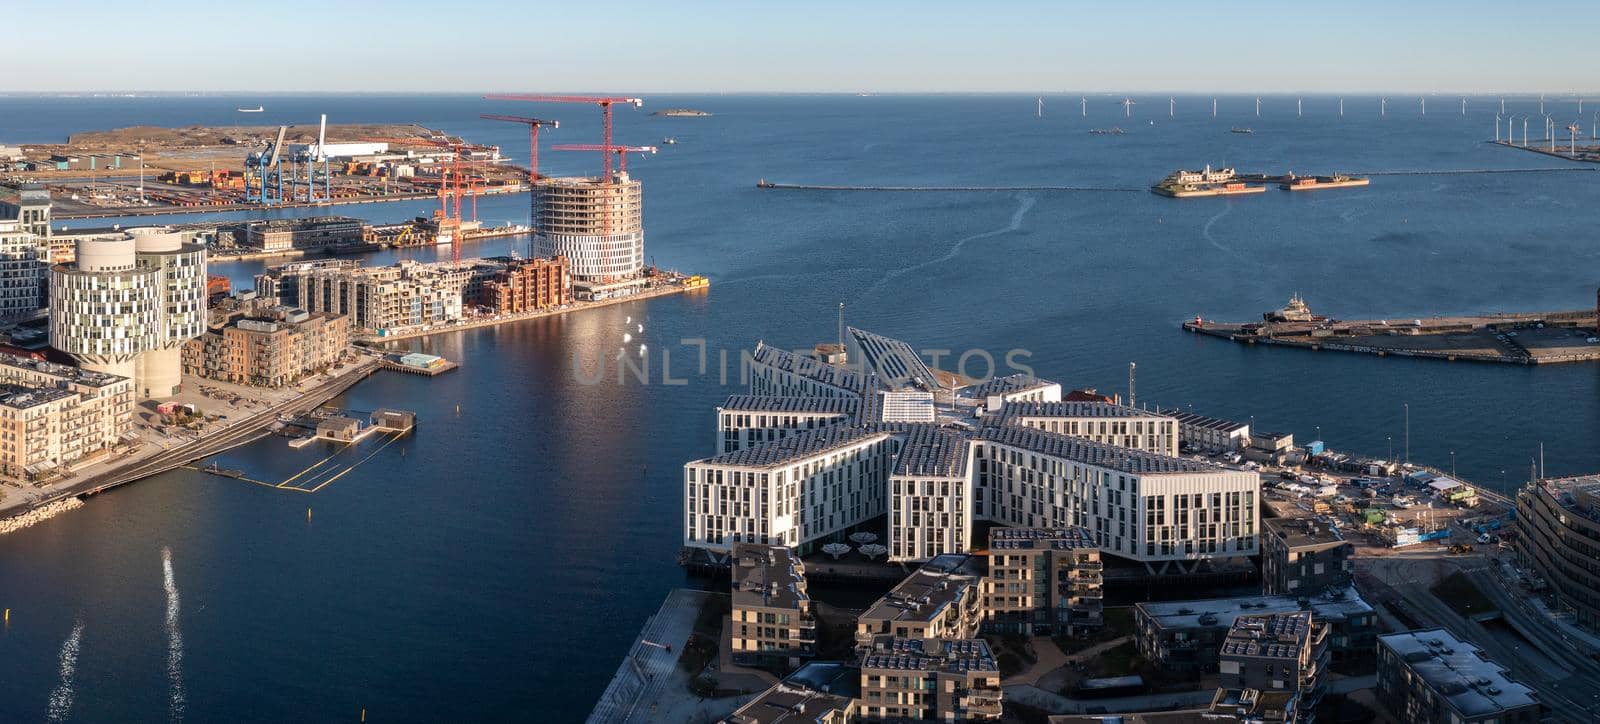 Copenhagen, Denmark - January 06, 2022: Aerial drone view of the UN City builing